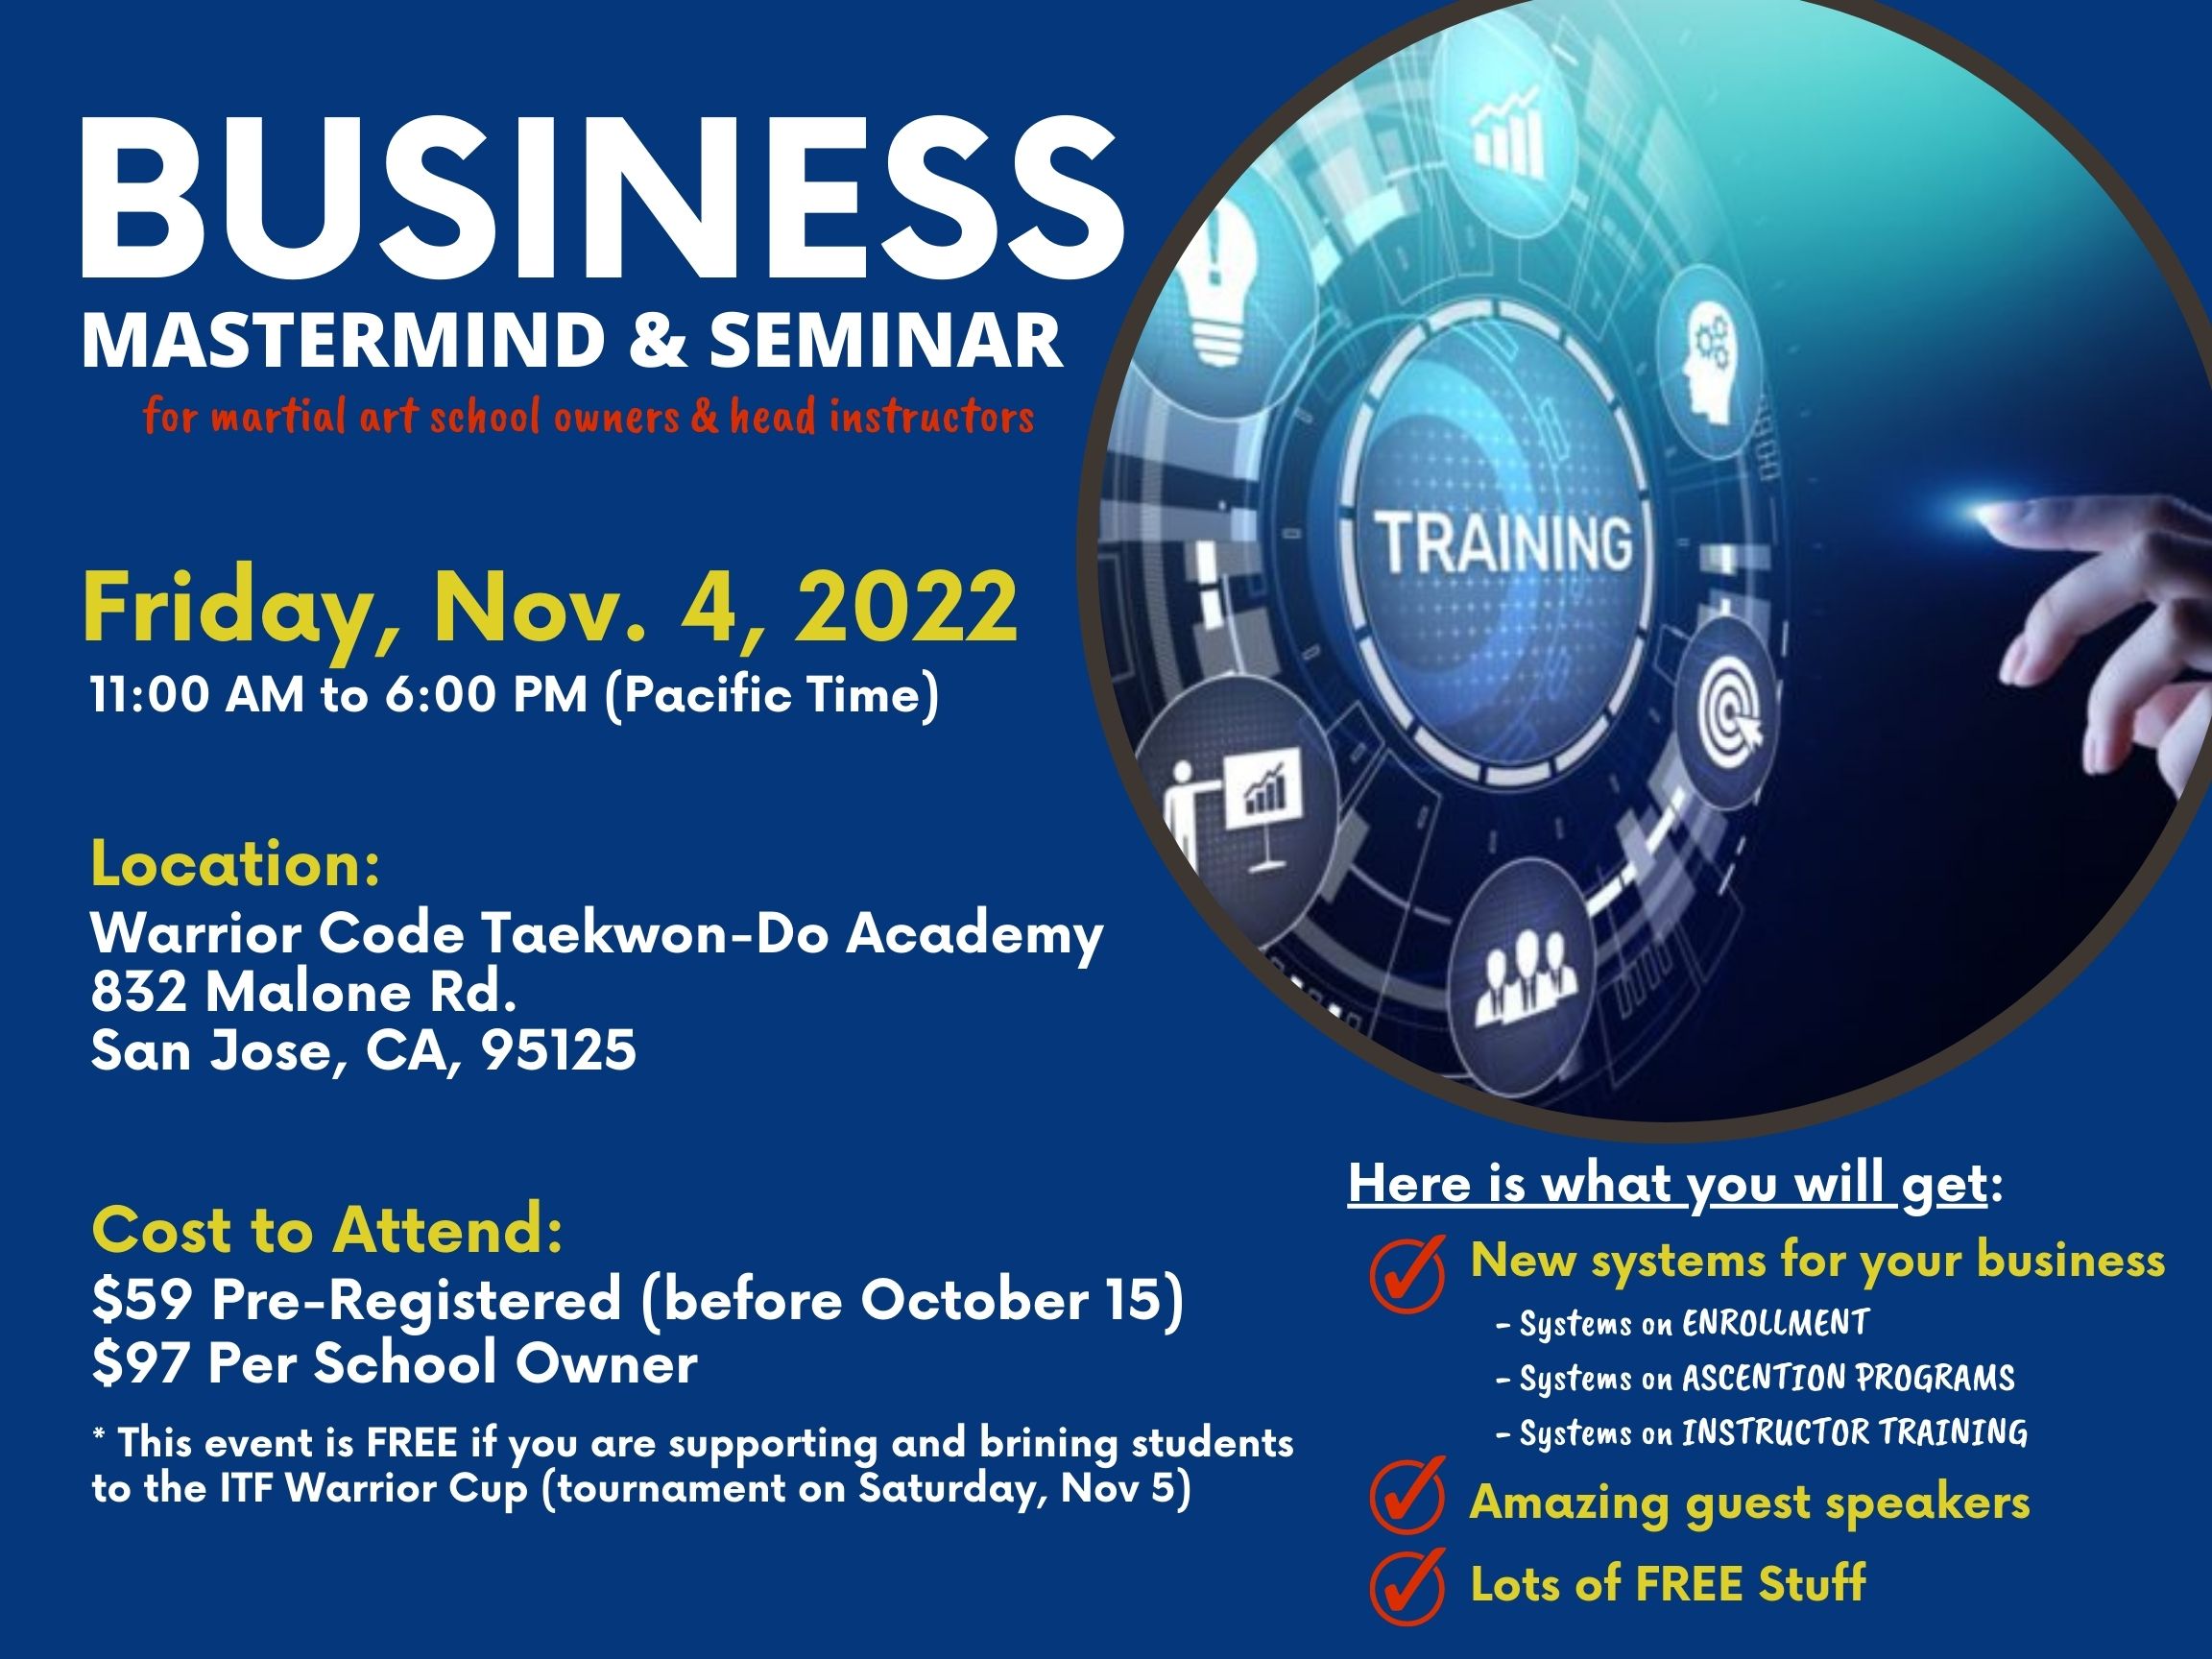 Business Mastermind and Seminar